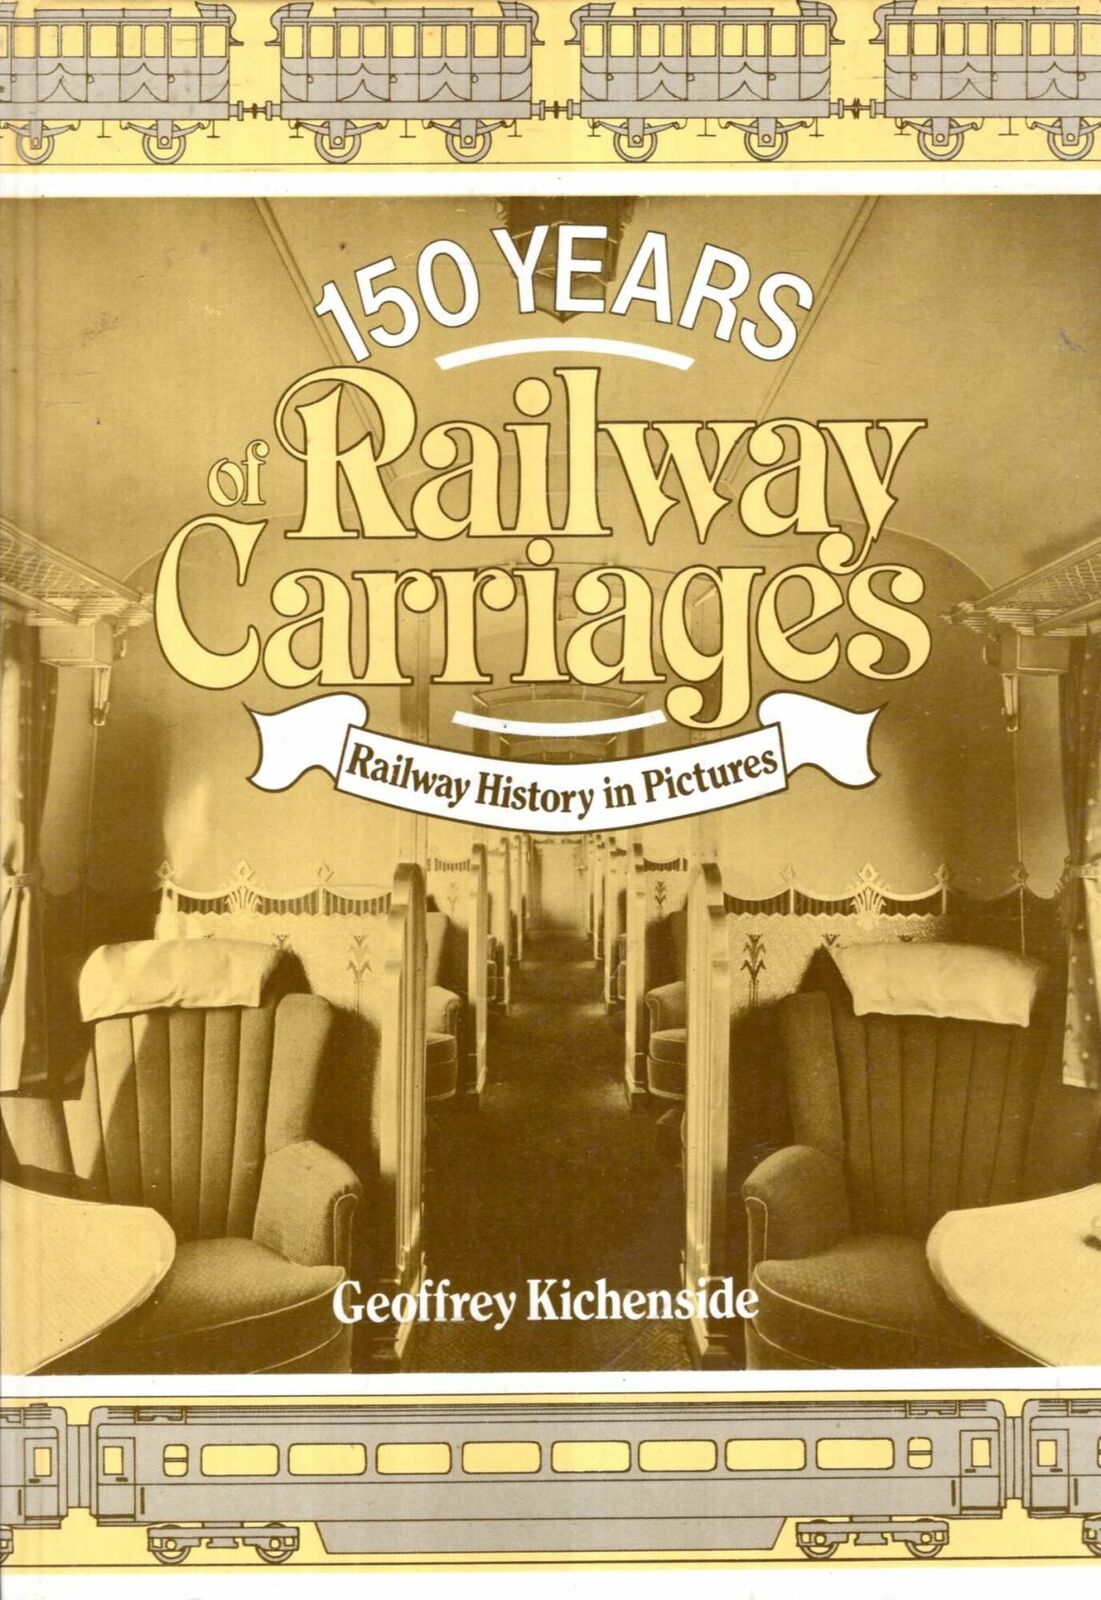 150 Years of Railway Carriages